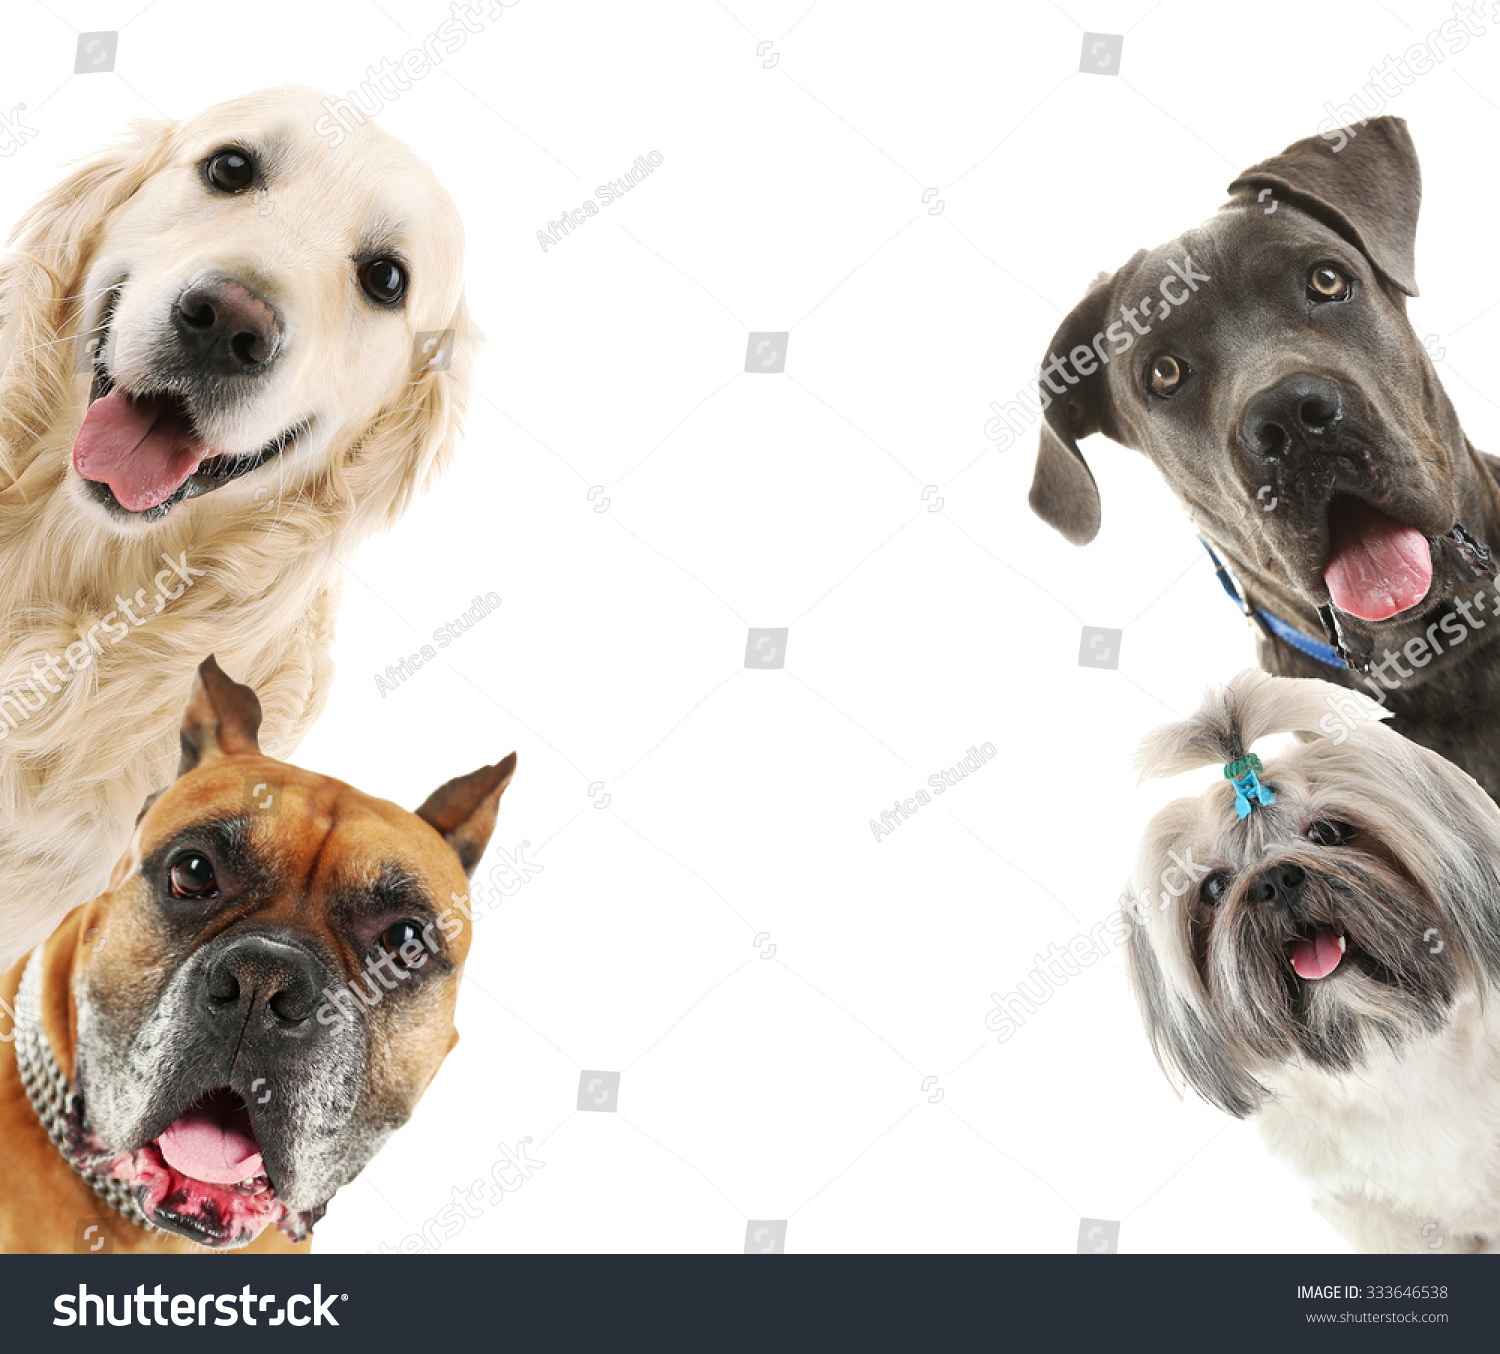 PowerPoint Template dogs isolated on white (kkknlnmkp)